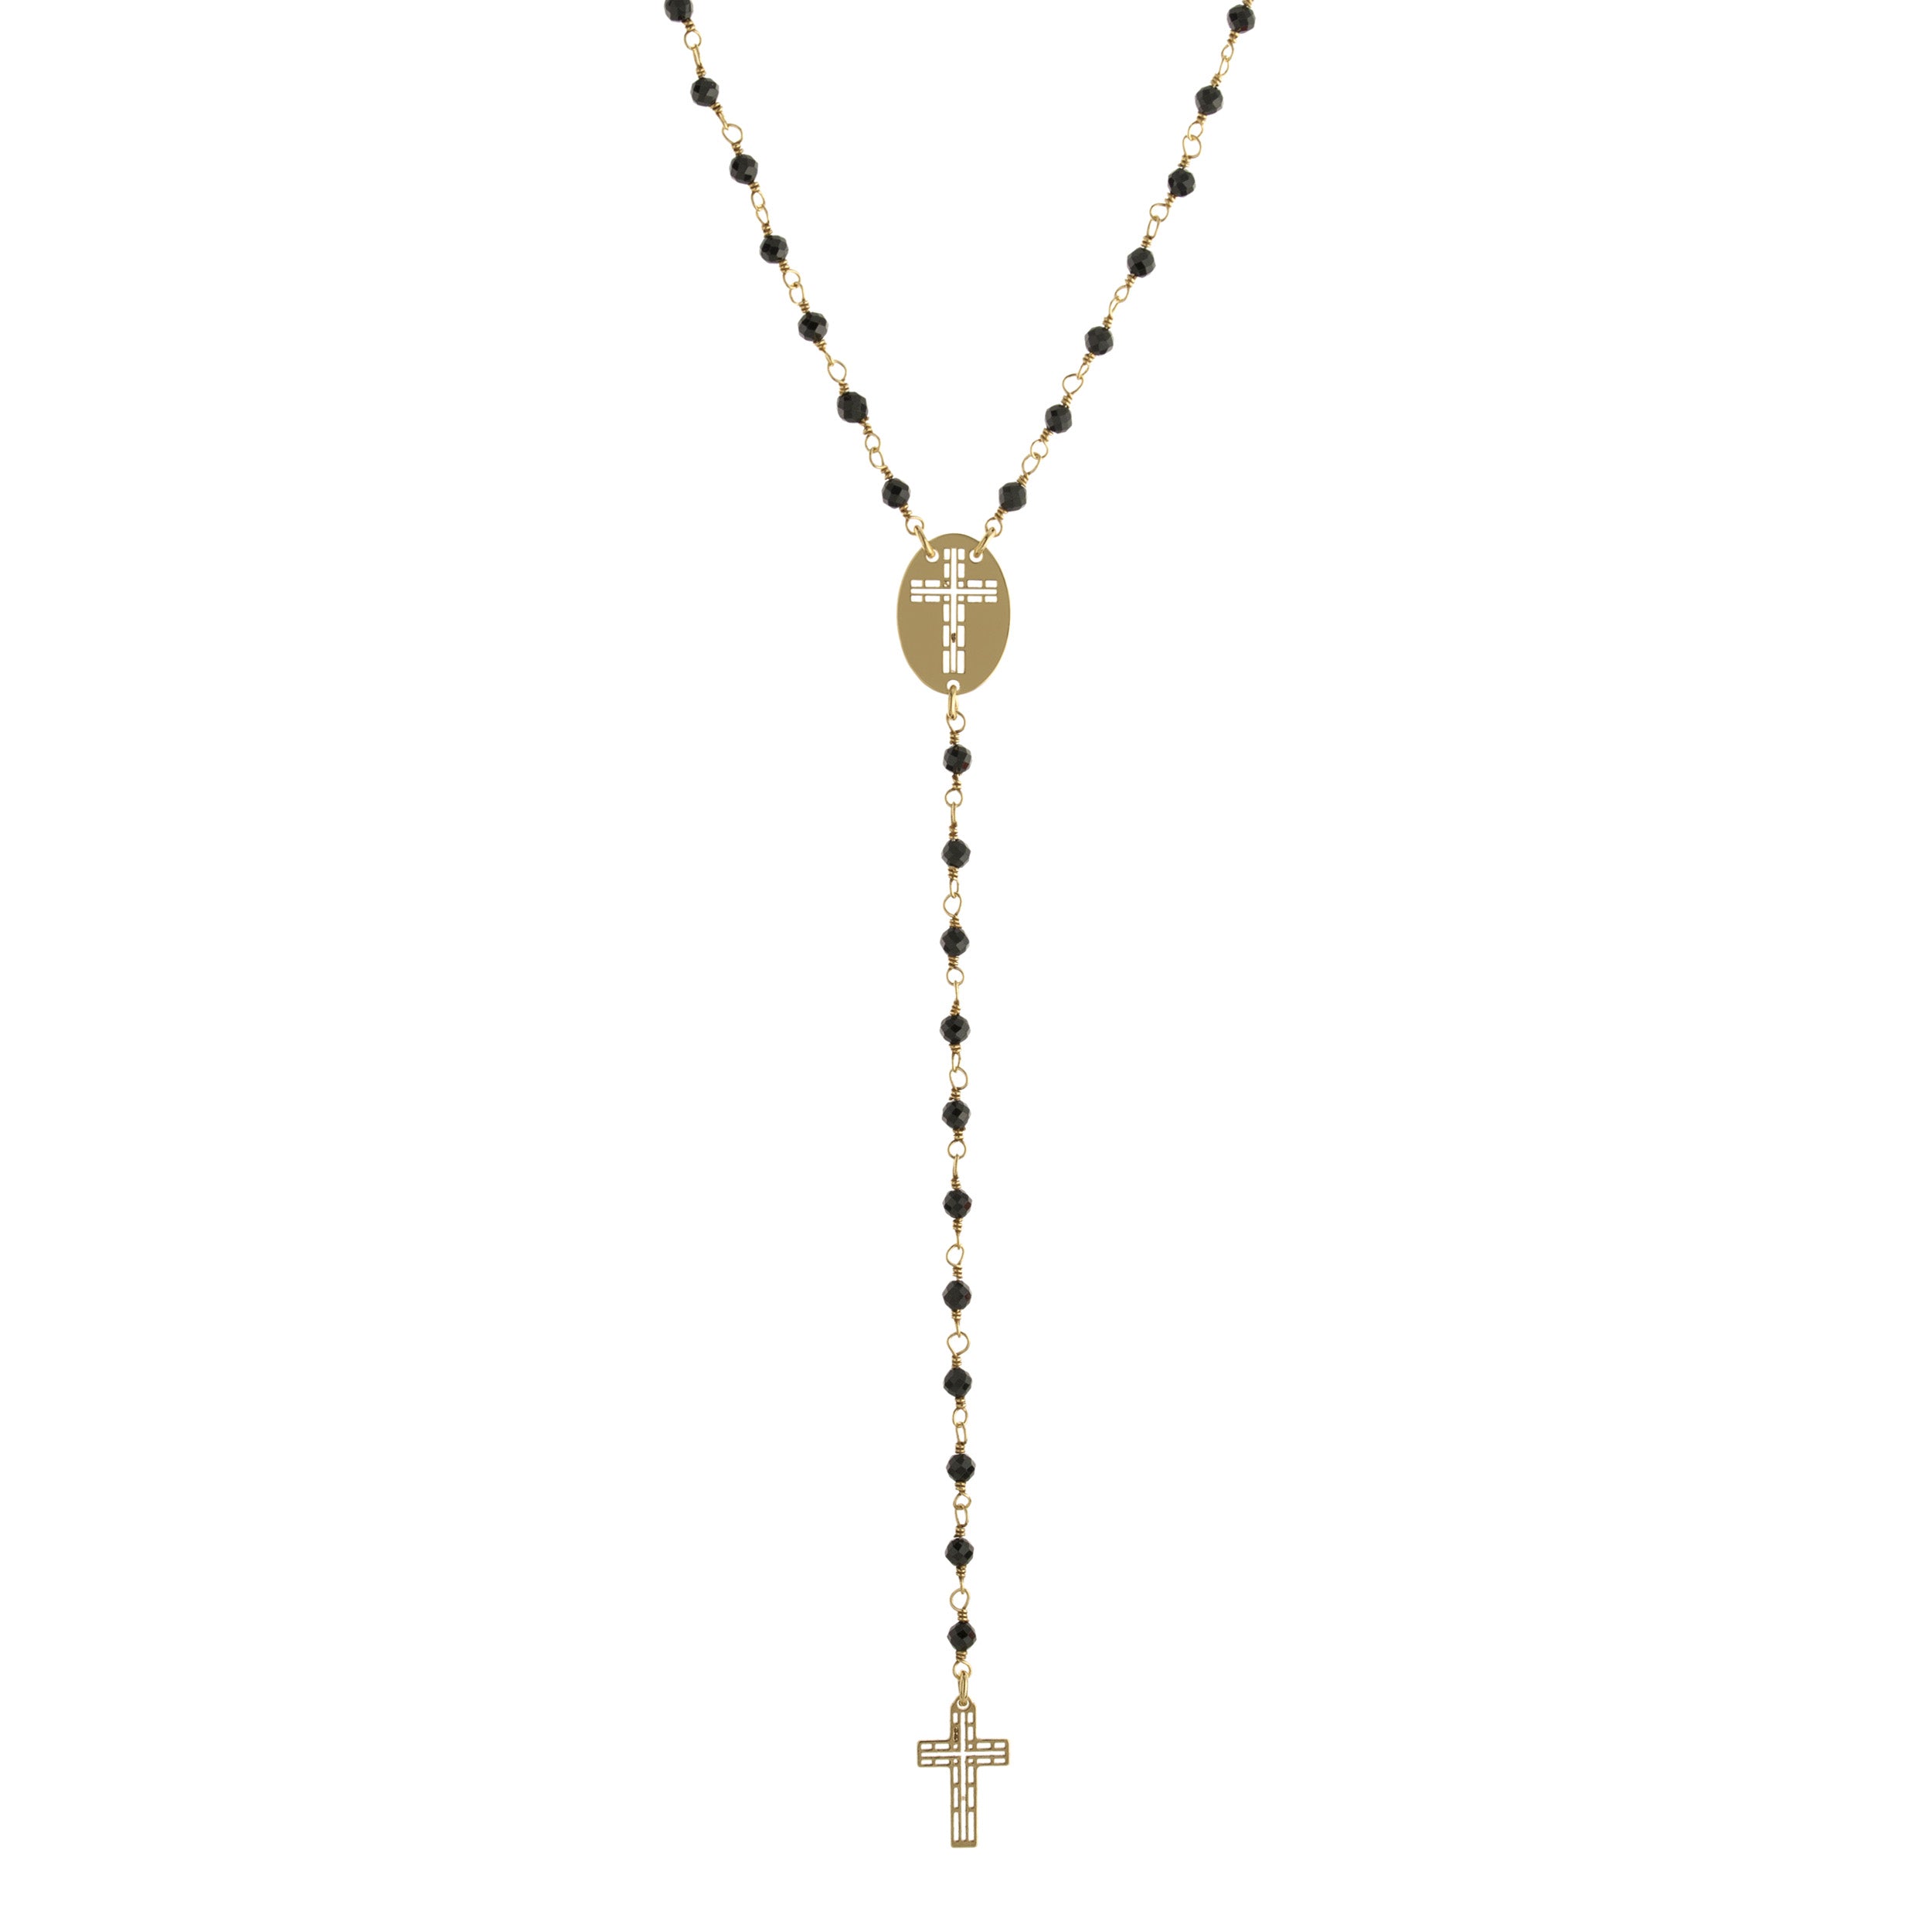 Crystal Rosary Necklace